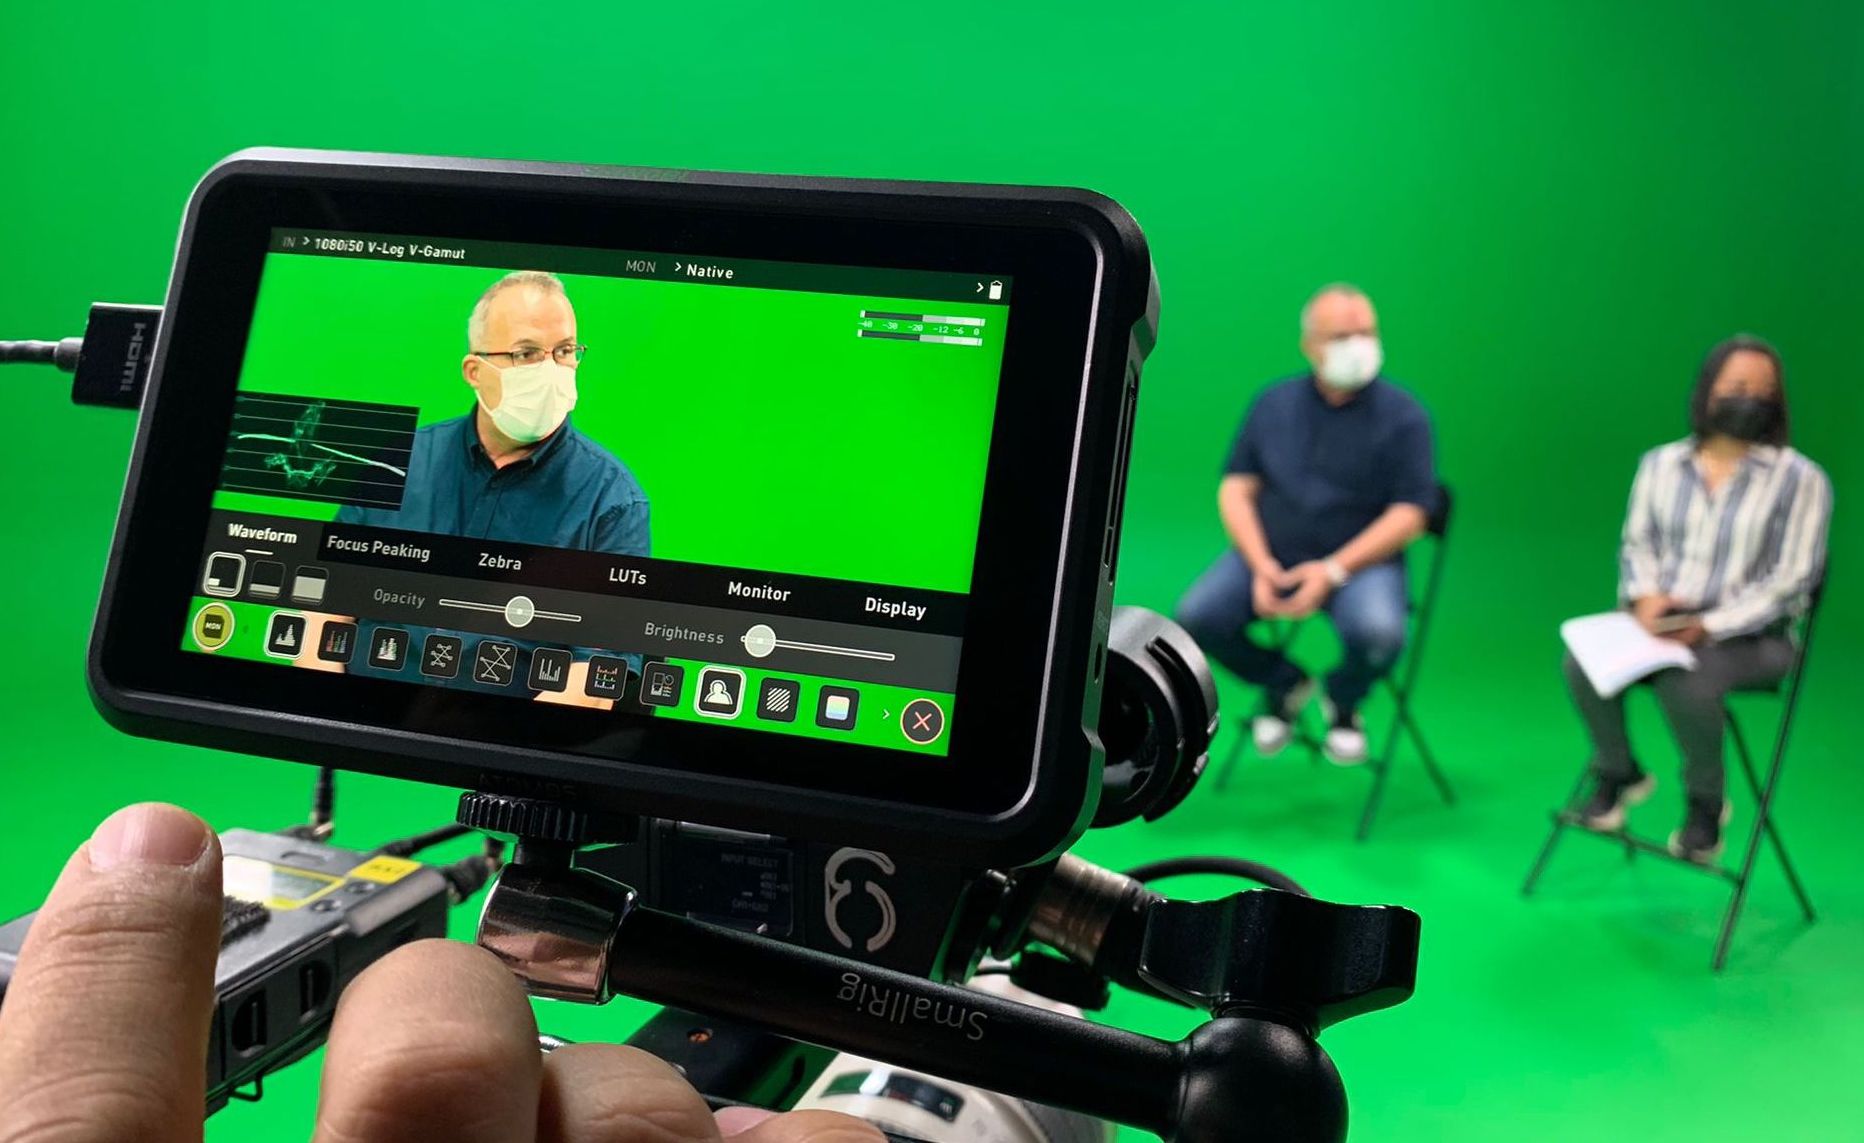 Monitor view of two subjects in green screen studio